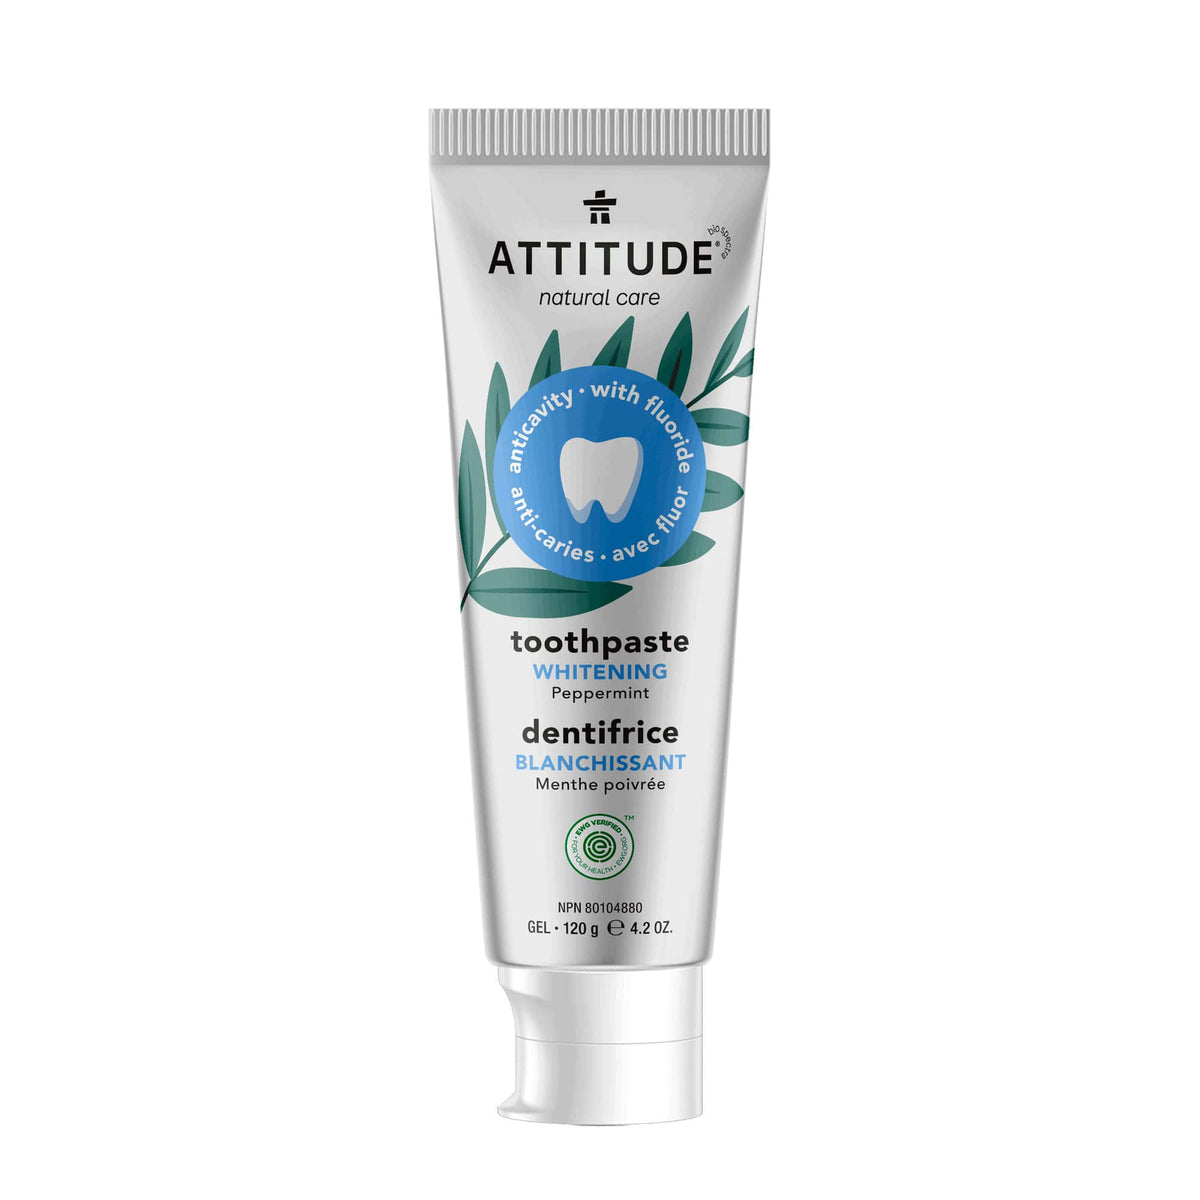 Toothpaste Whitening with Fluoride - 120g - ProCare Outlet by ATTITUDE